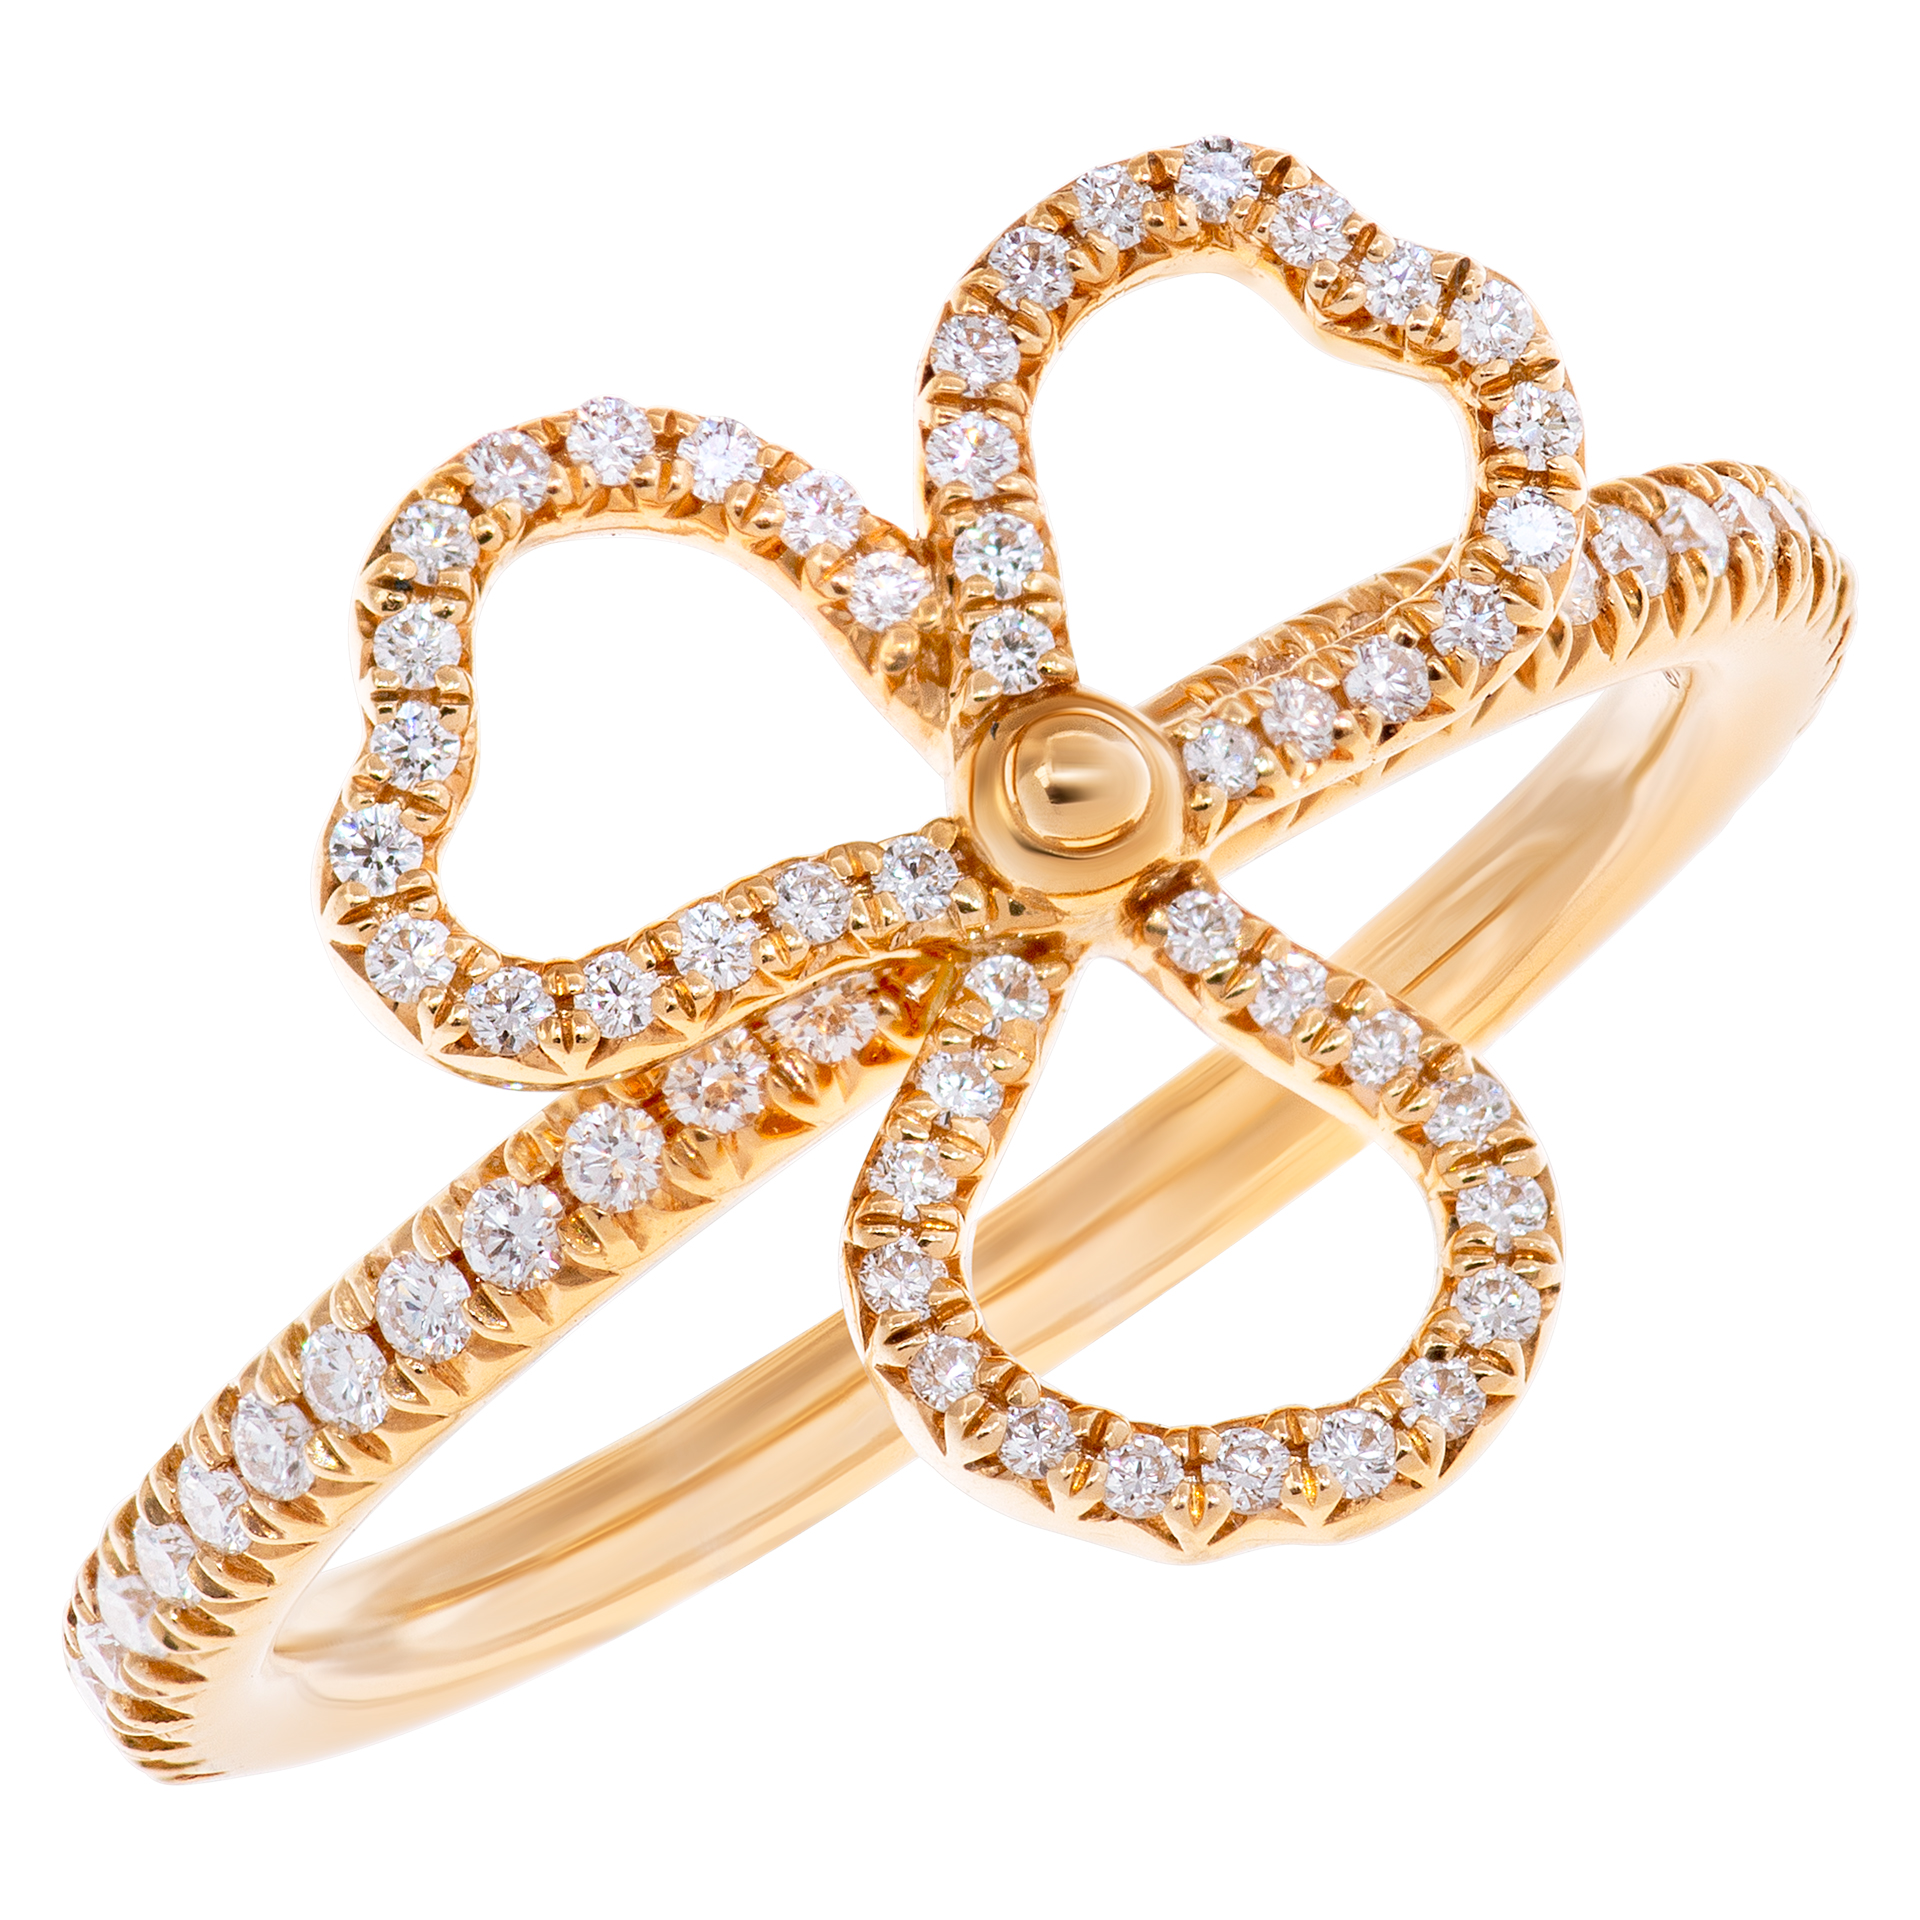 Tiffany & Co. "Paper Flowers" collection, open 3 leaves clover ring with 0.14 carat in diamonds, set in 18k rose gold image 3